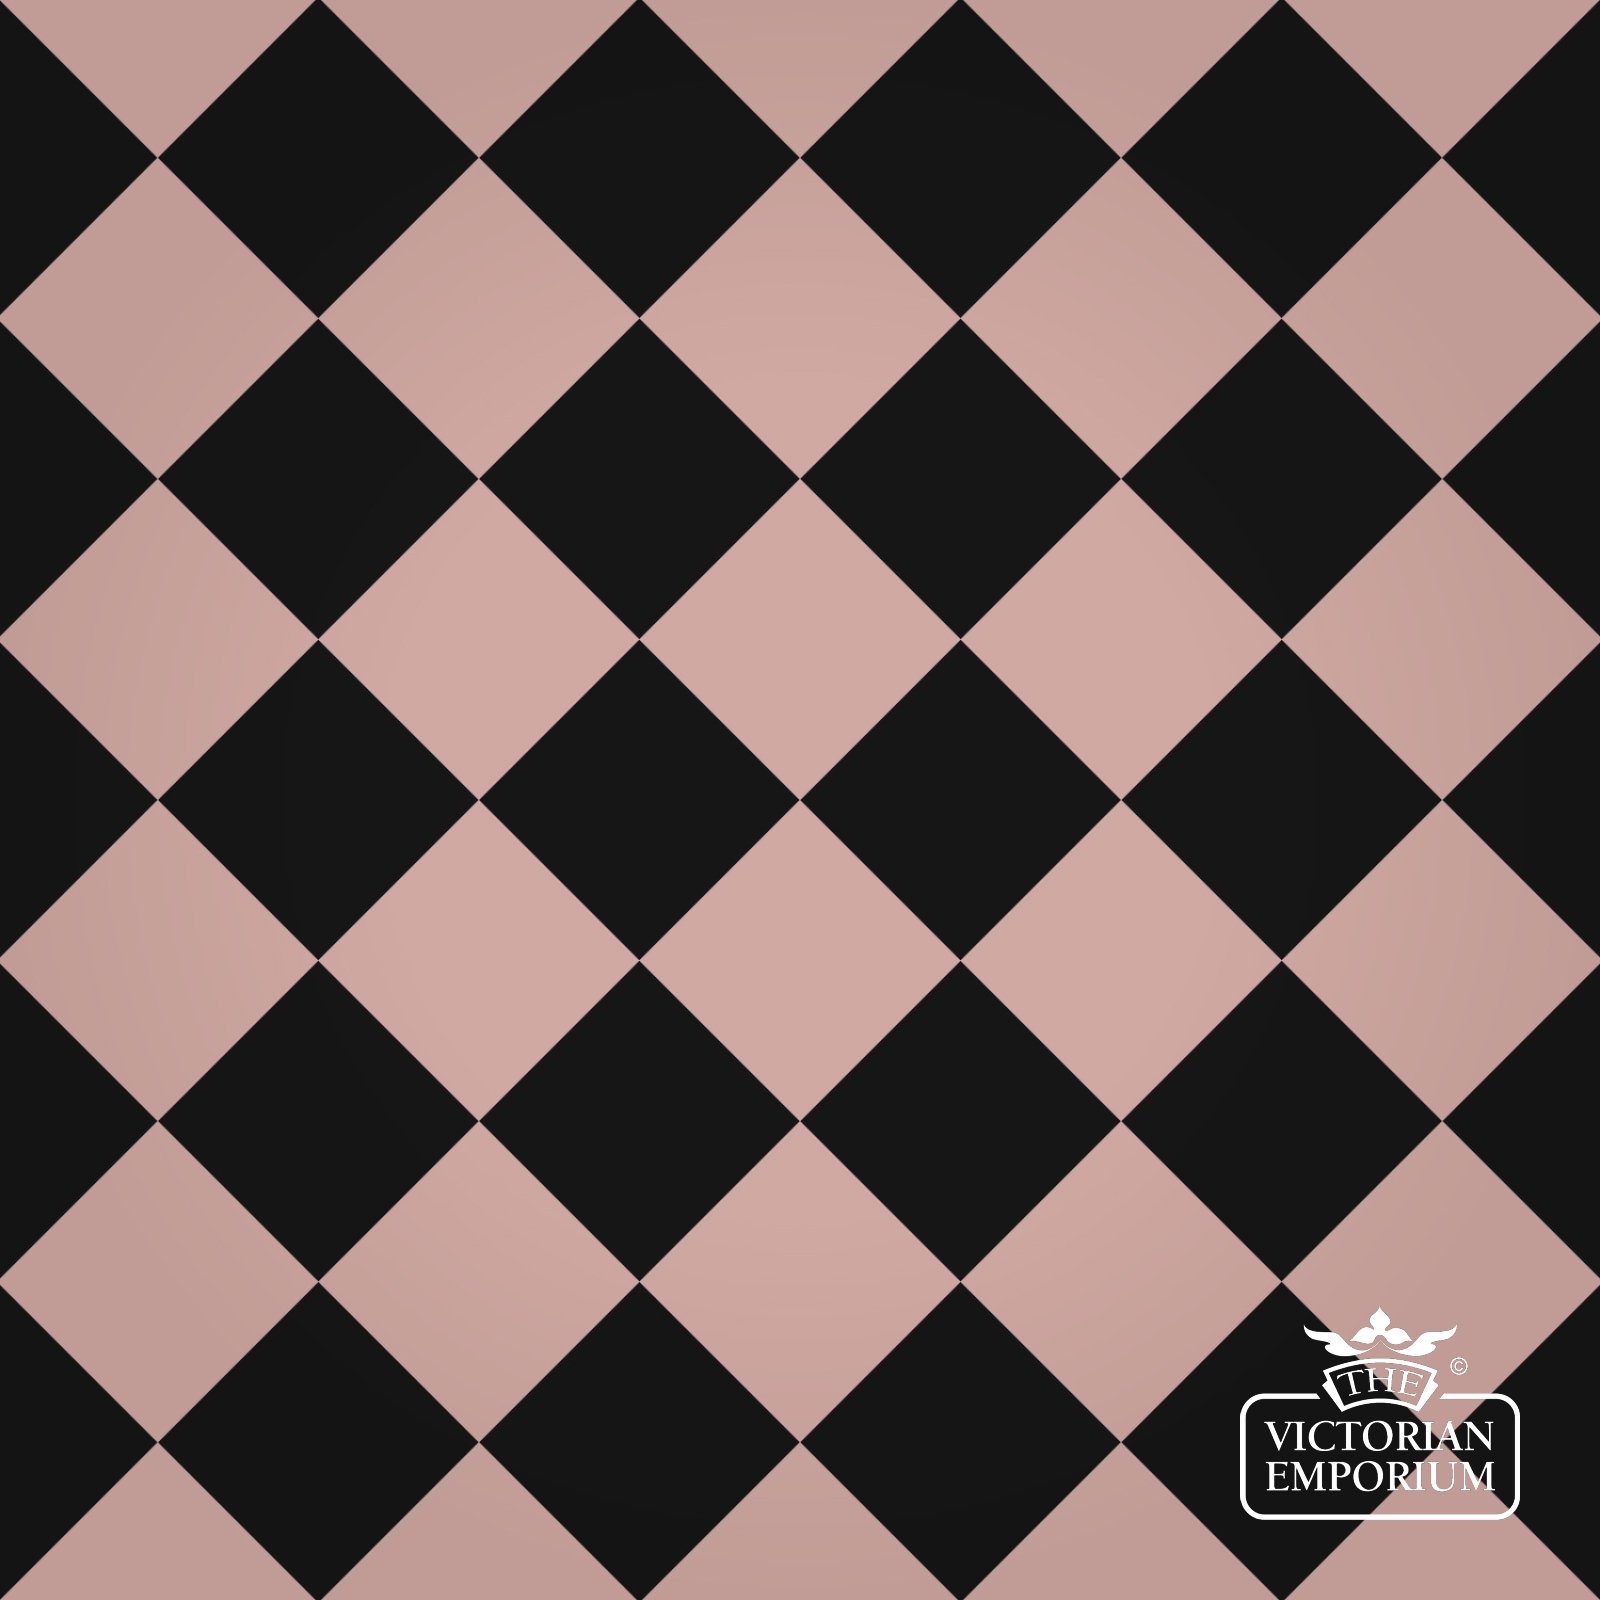 Victorian Path tiles - Black and Pink 10cm x 10cm squares (suitable for outdoor use)